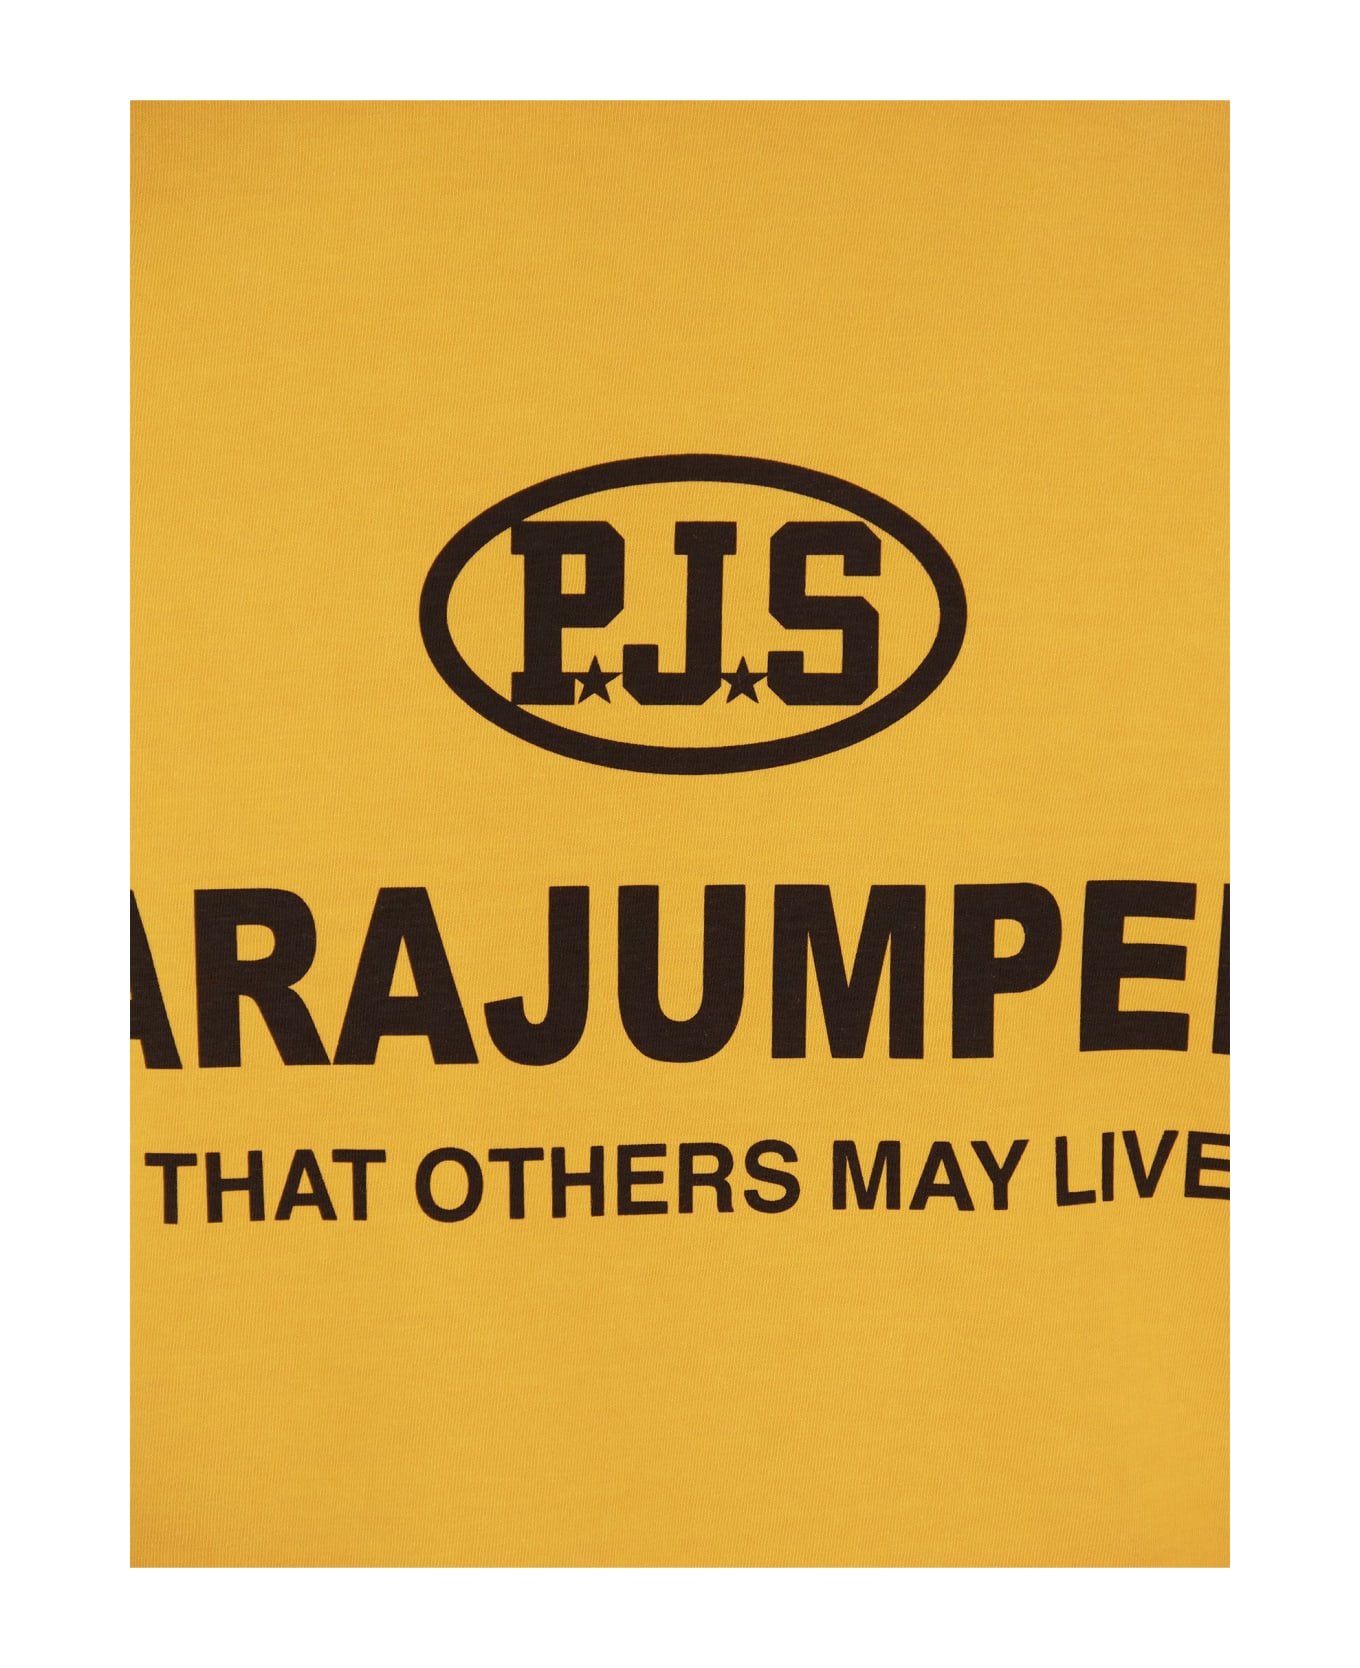 Parajumpers Toml - T-shirt With Front Lettering - Yellow